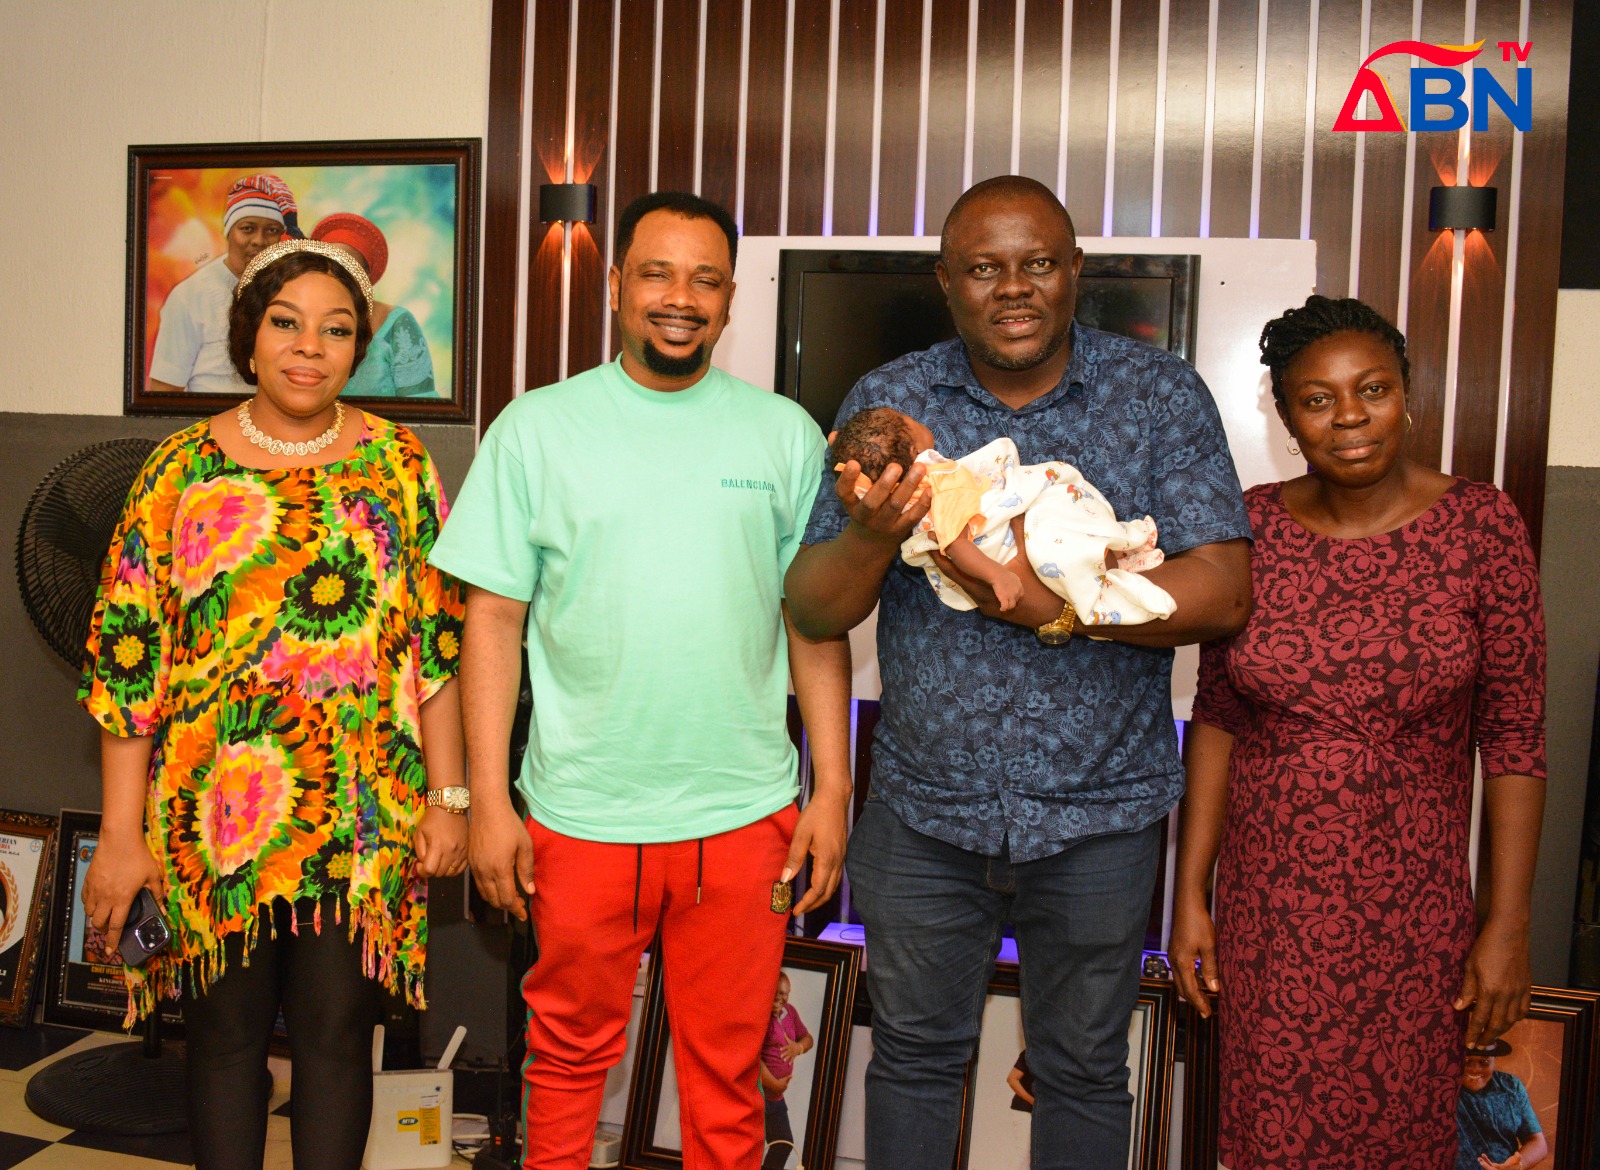 An Abia-based cleric and the founder Power World Ministries, Rev. Uche Ume on Sunday visited the Director ABN TV, Mr. Ifeanyi Okali and his wife at their